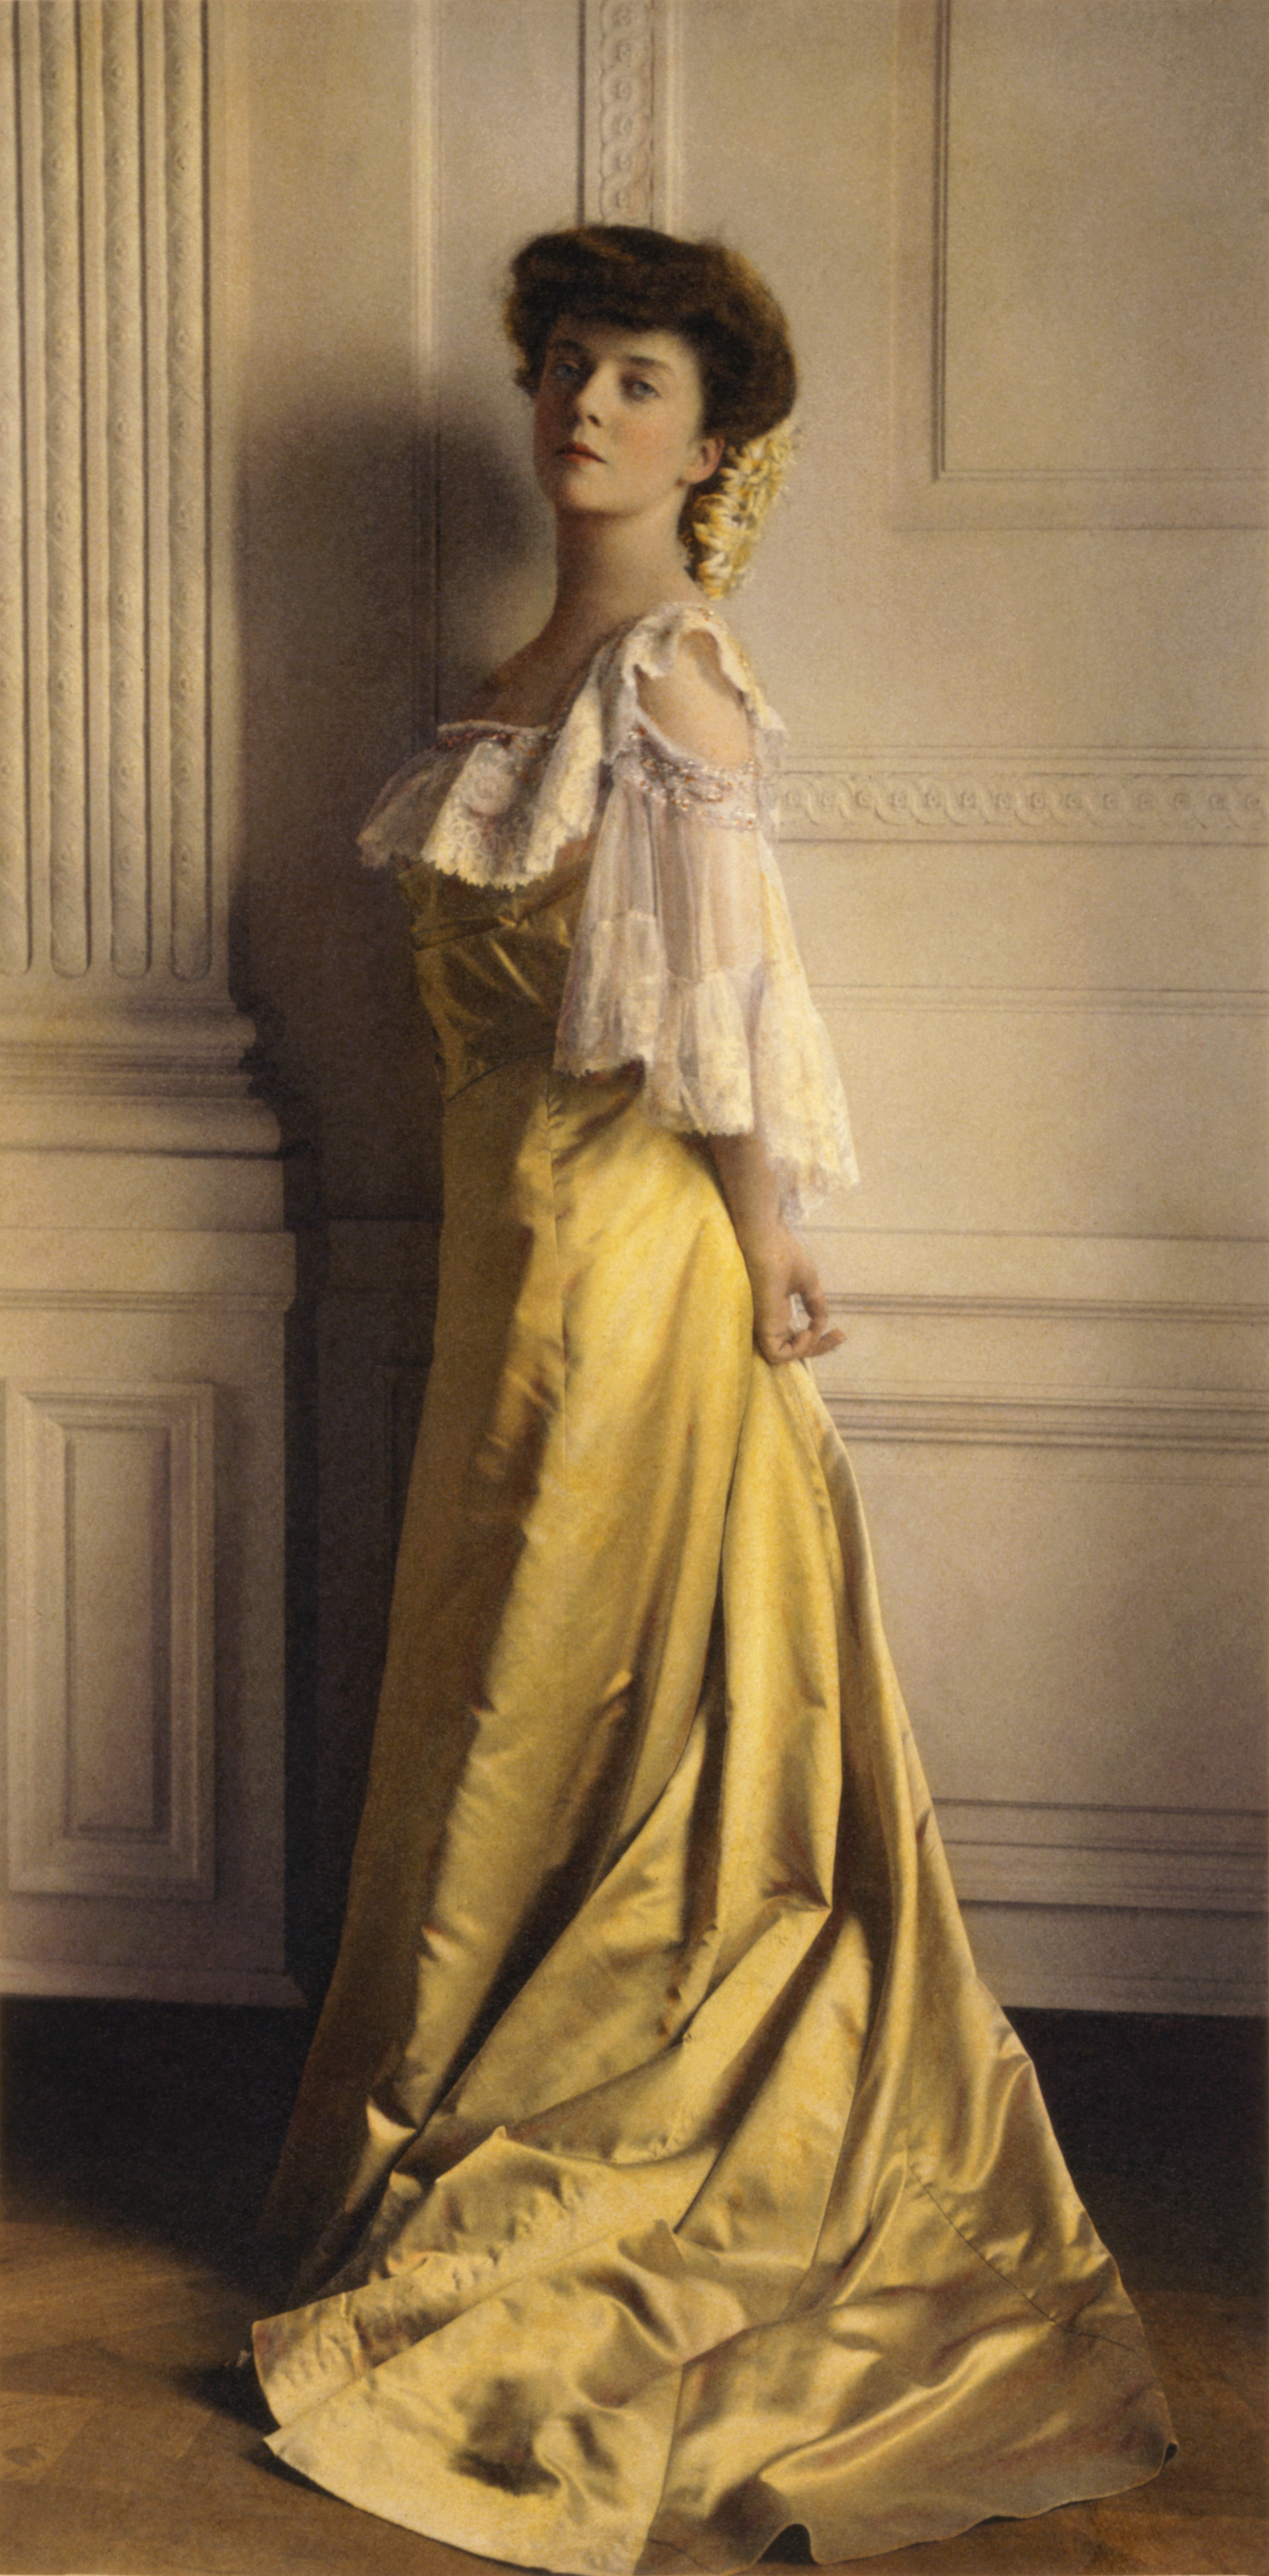 Hand-tinted photograph of Alice Roosevelt by Frances Benjamin Johnston, taken around her debut in 1903